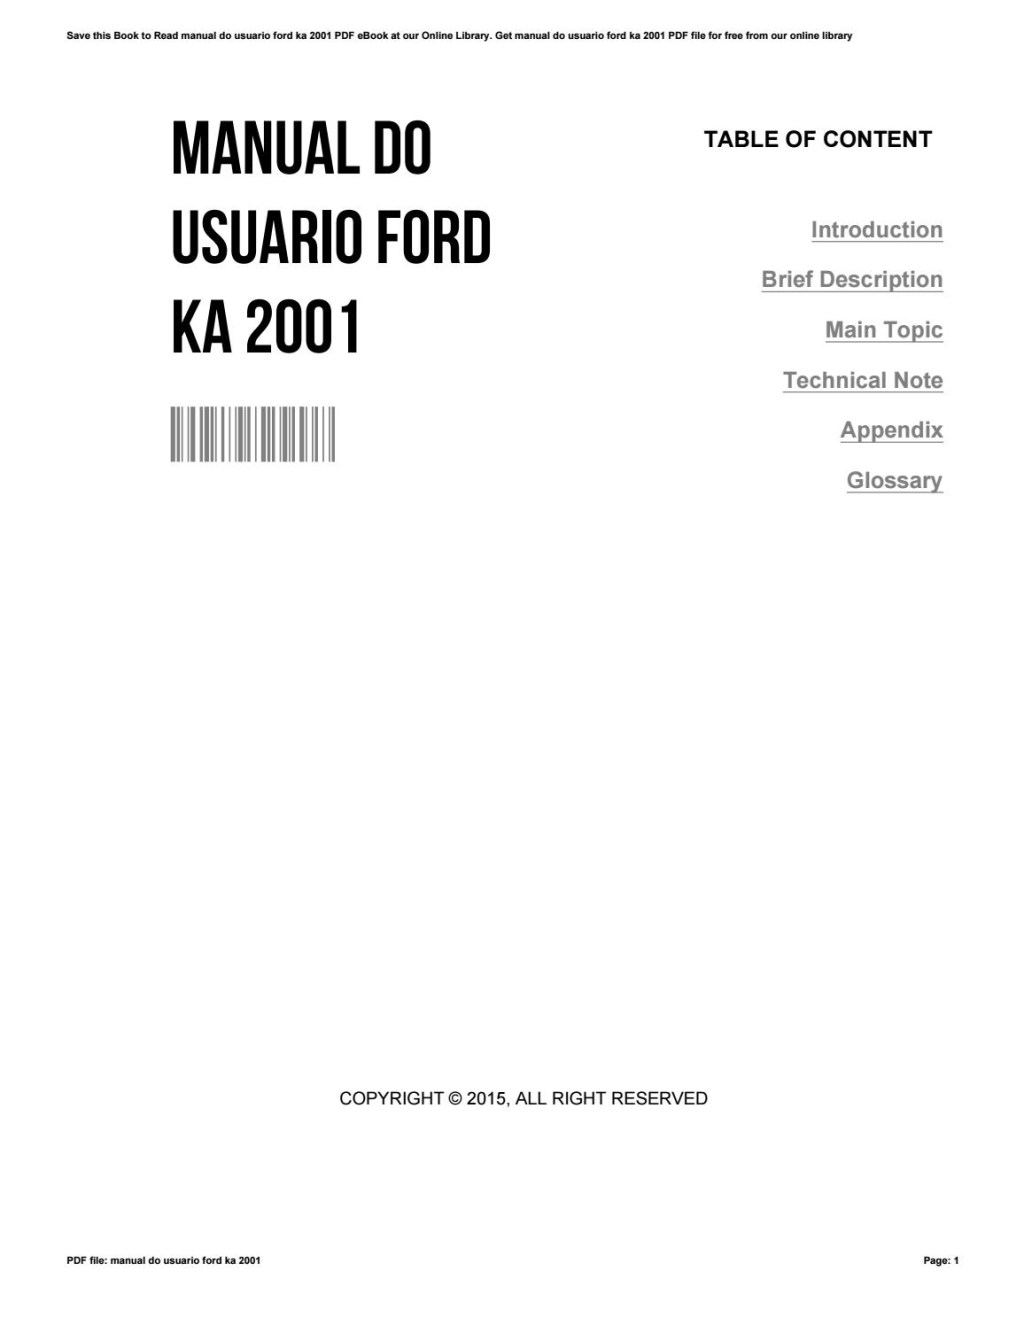 Picture of: Manual do usuario ford ka  by szerz – Issuu